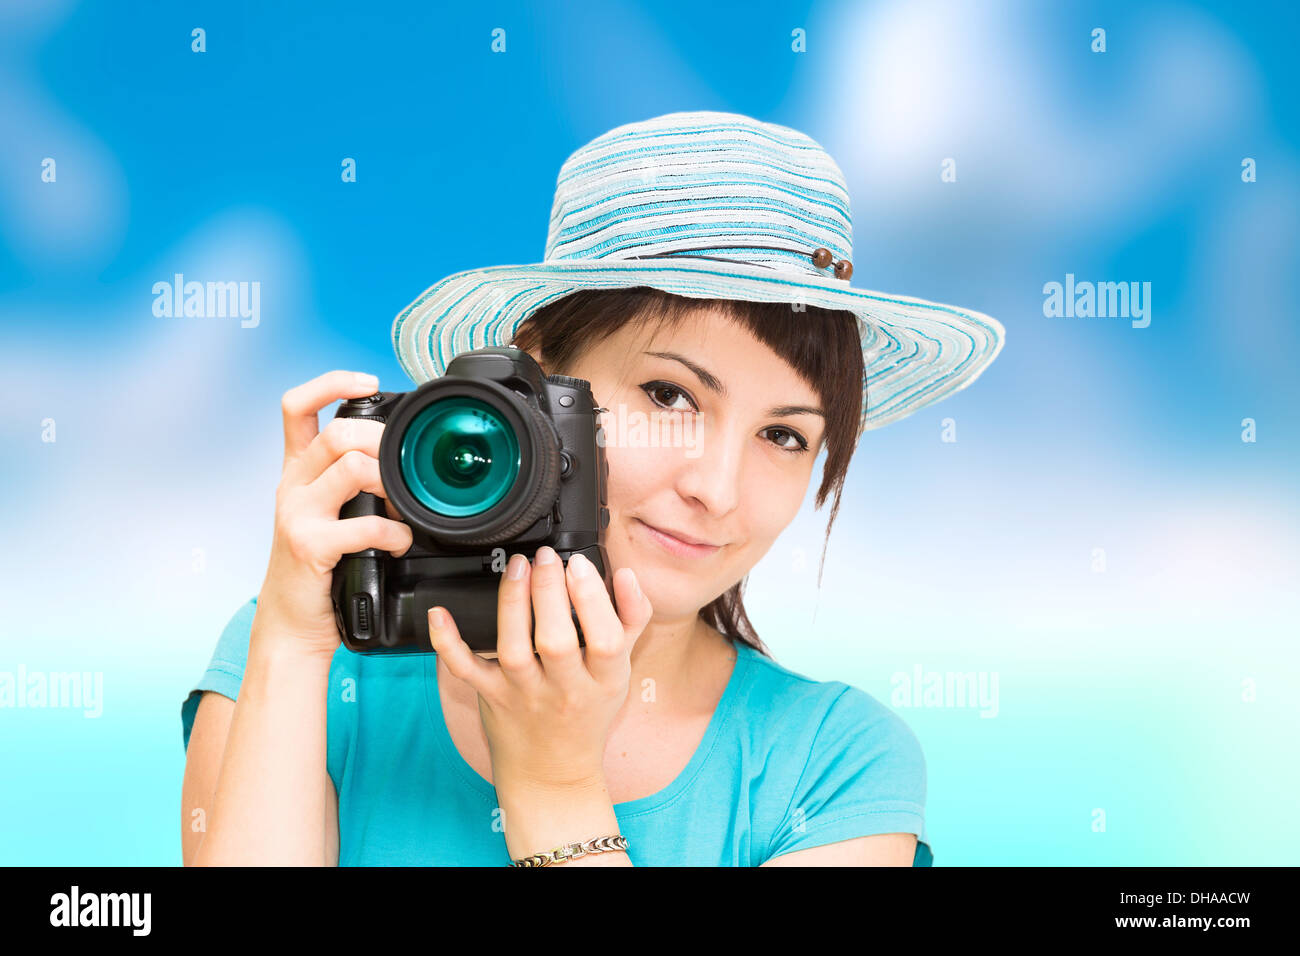 Pretty woman is a professional photographer with dslr camera Stock Photo